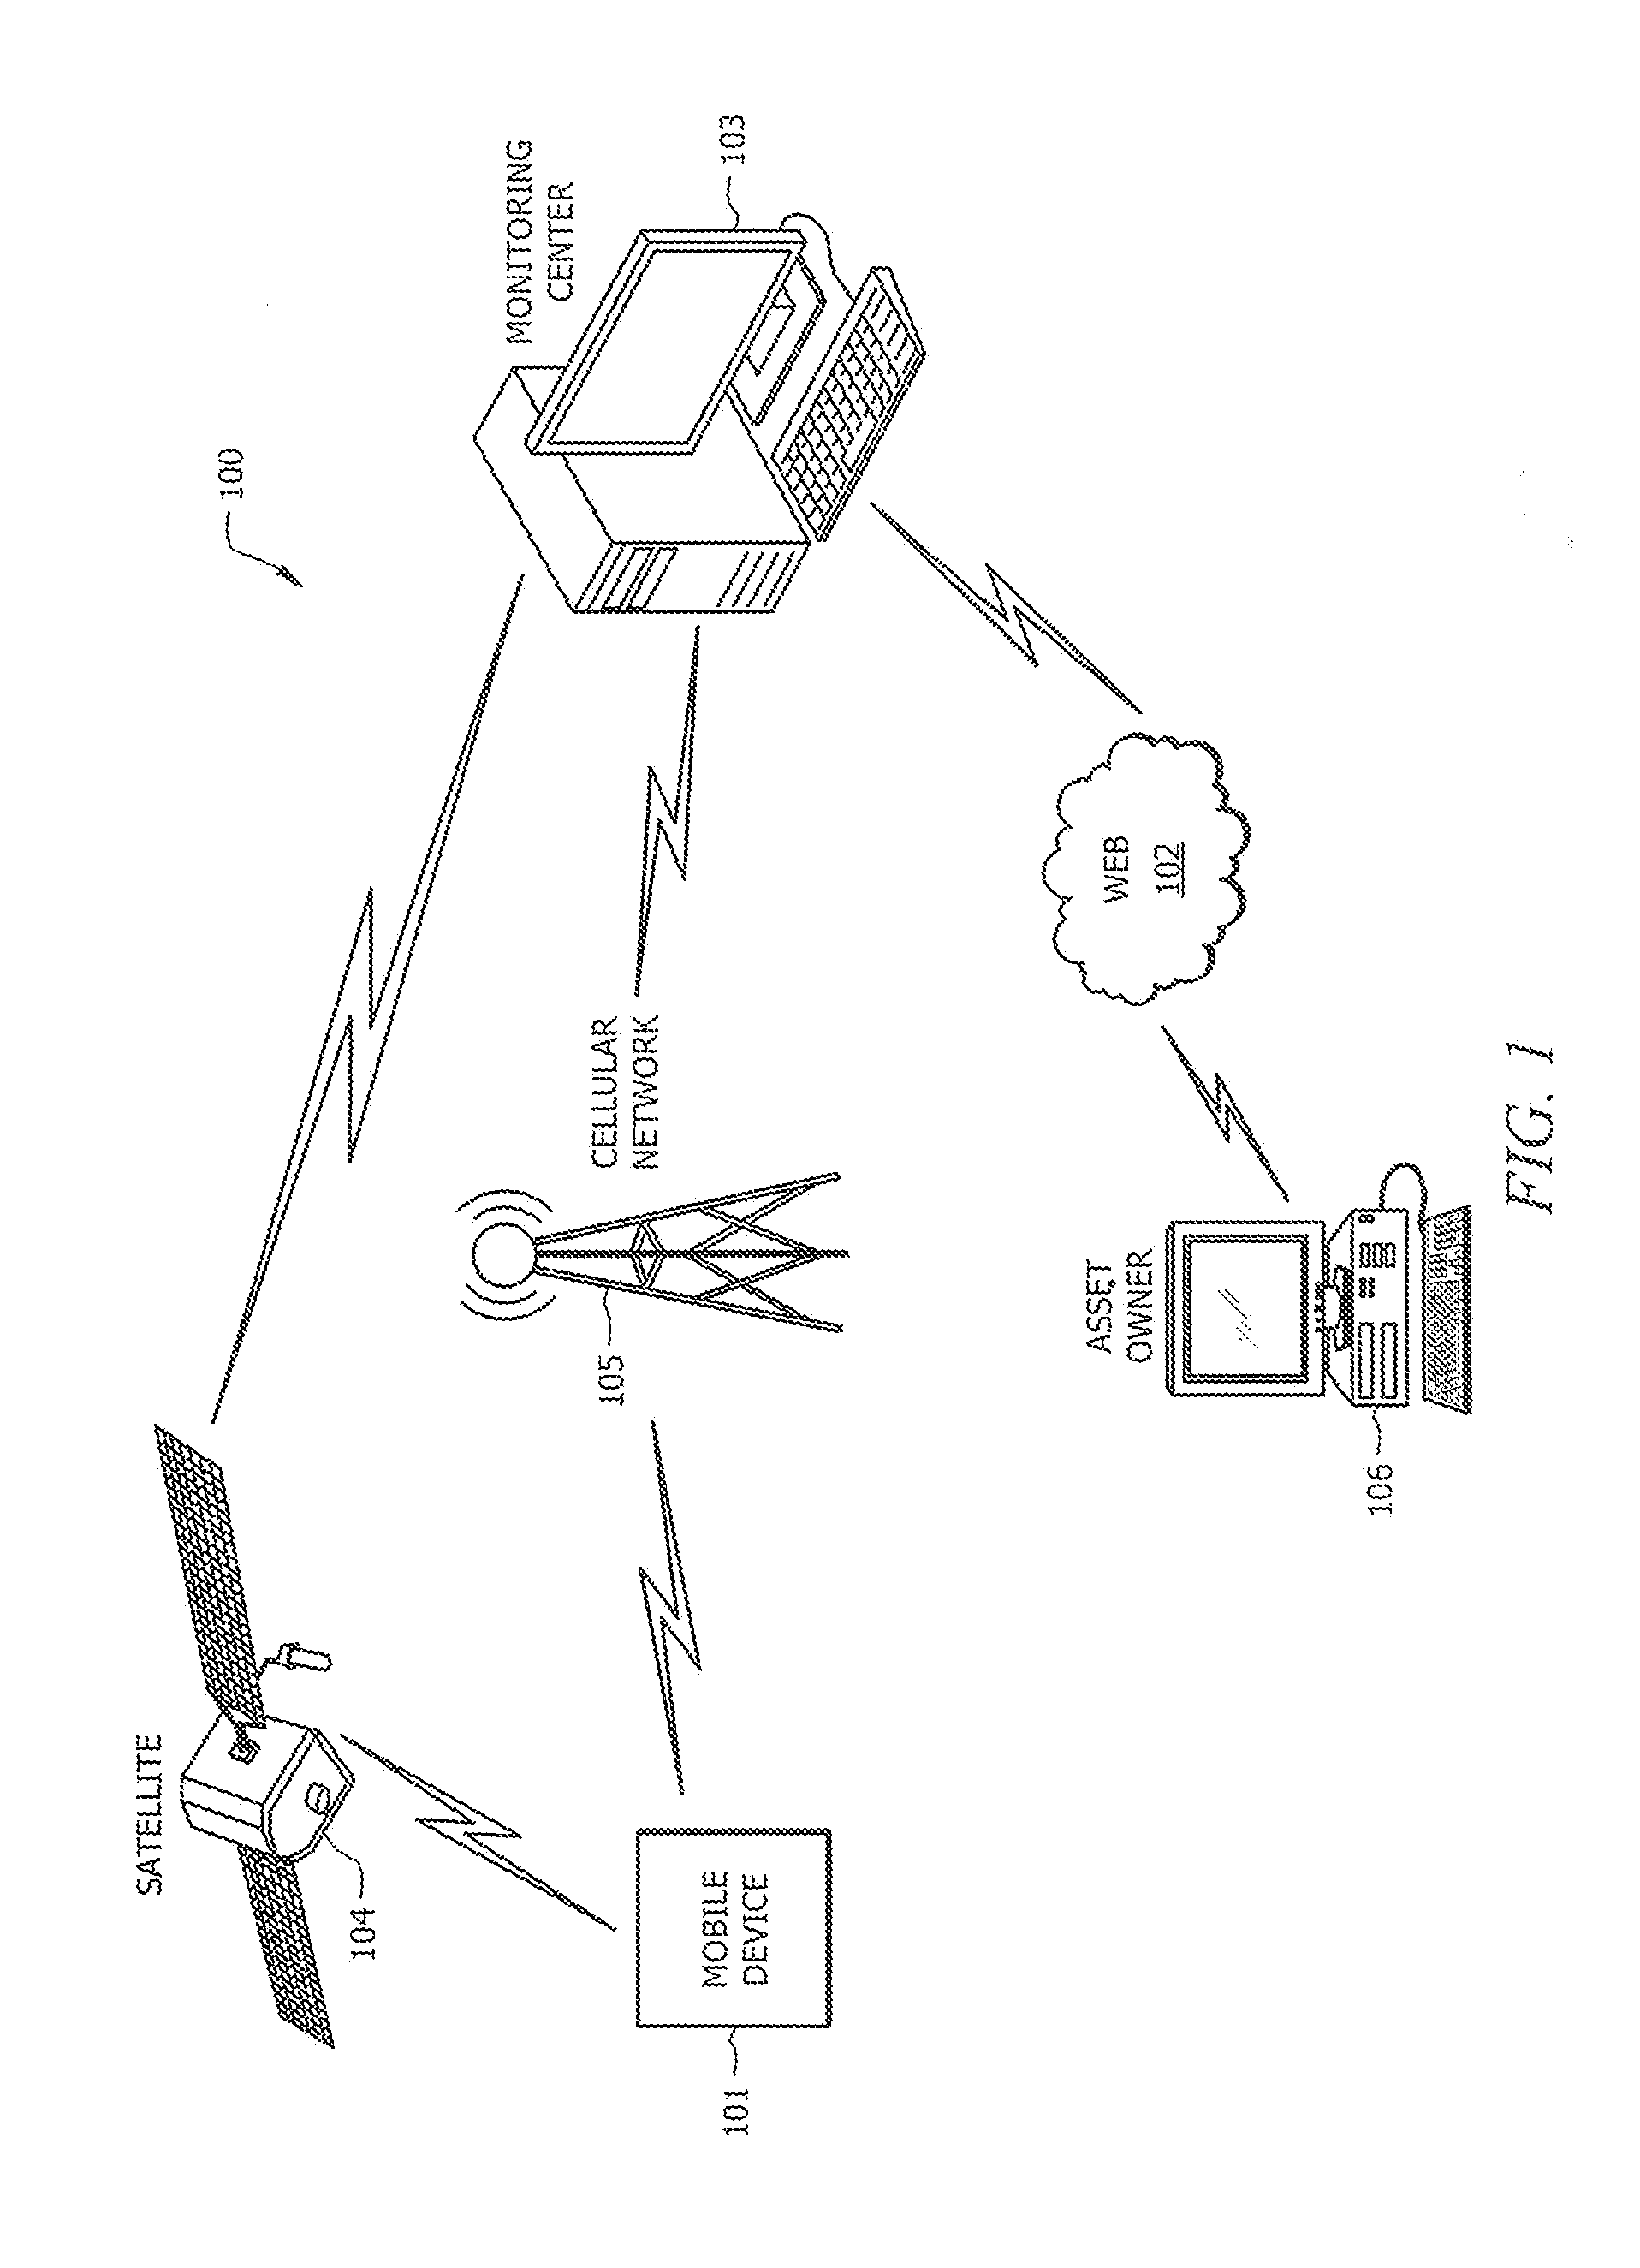 System and Method for Determining Best Available Location for a Mobile Device